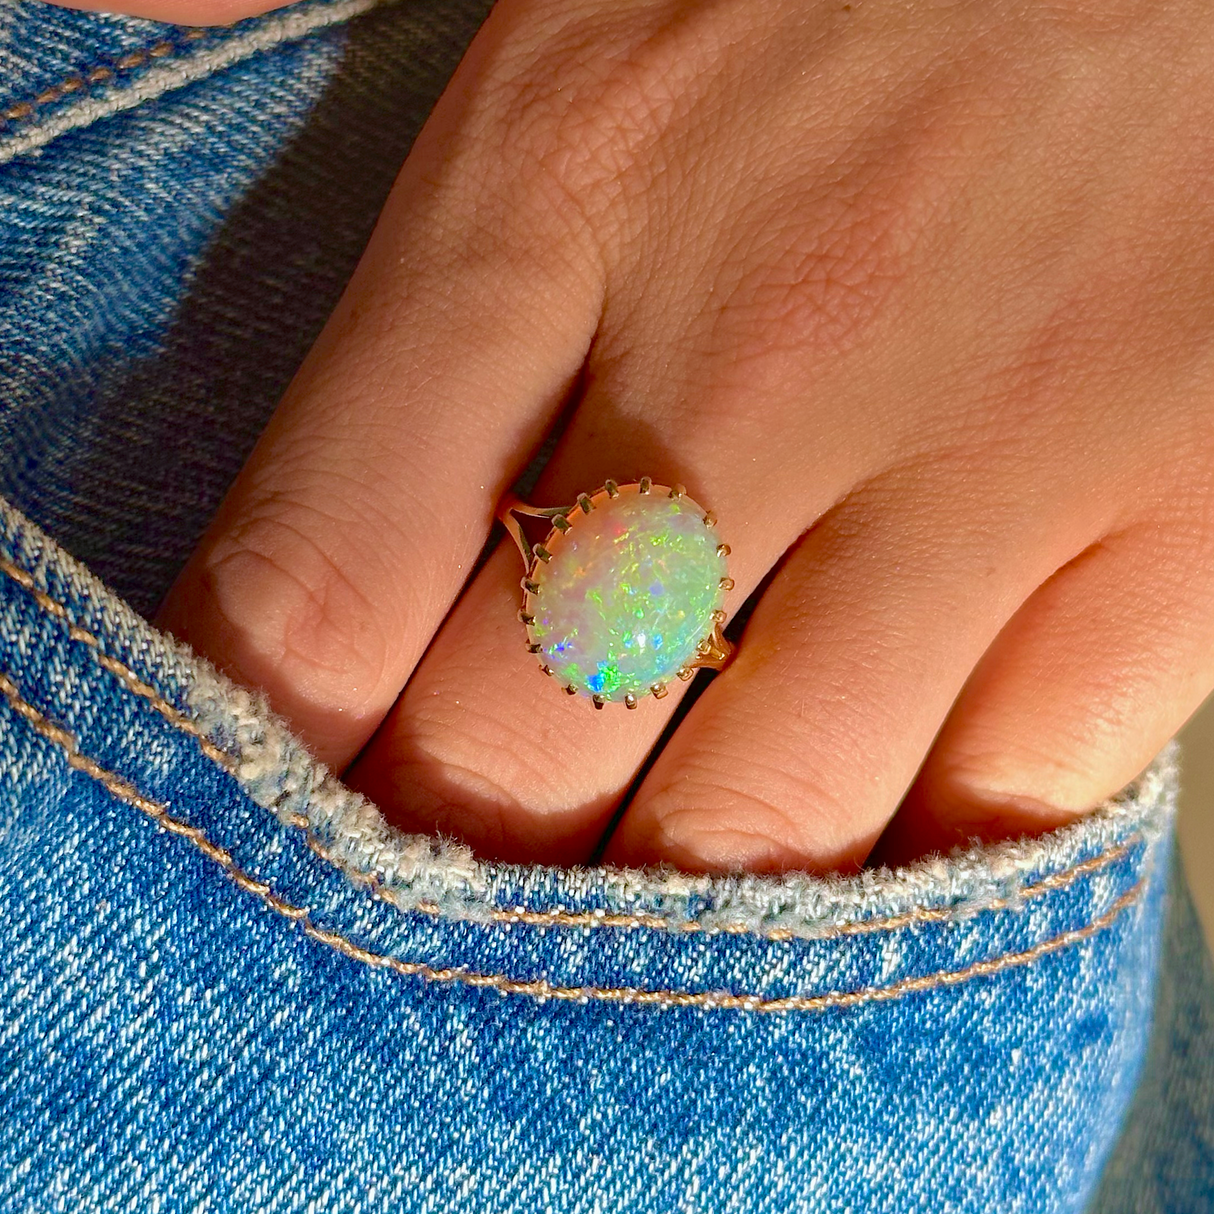 cabochon white opal cocktail ring with 18ct yellow gold band, worn on hand in pocket of jeans, front view. 